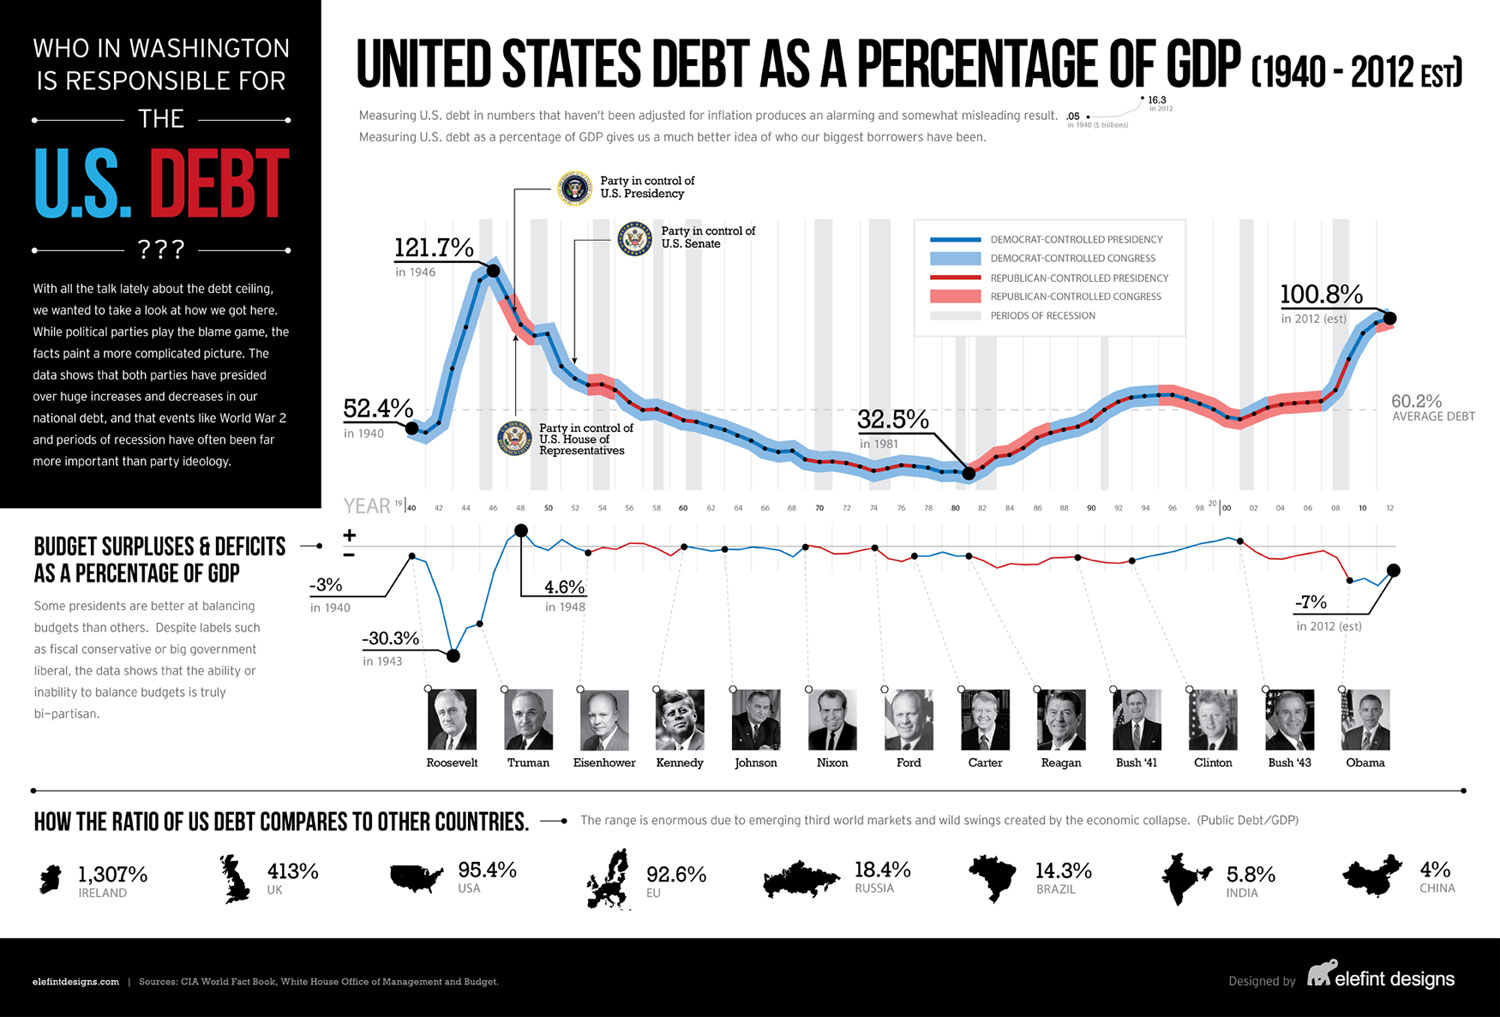 United States debt as a percentage of GDP - Rose Law Group ...